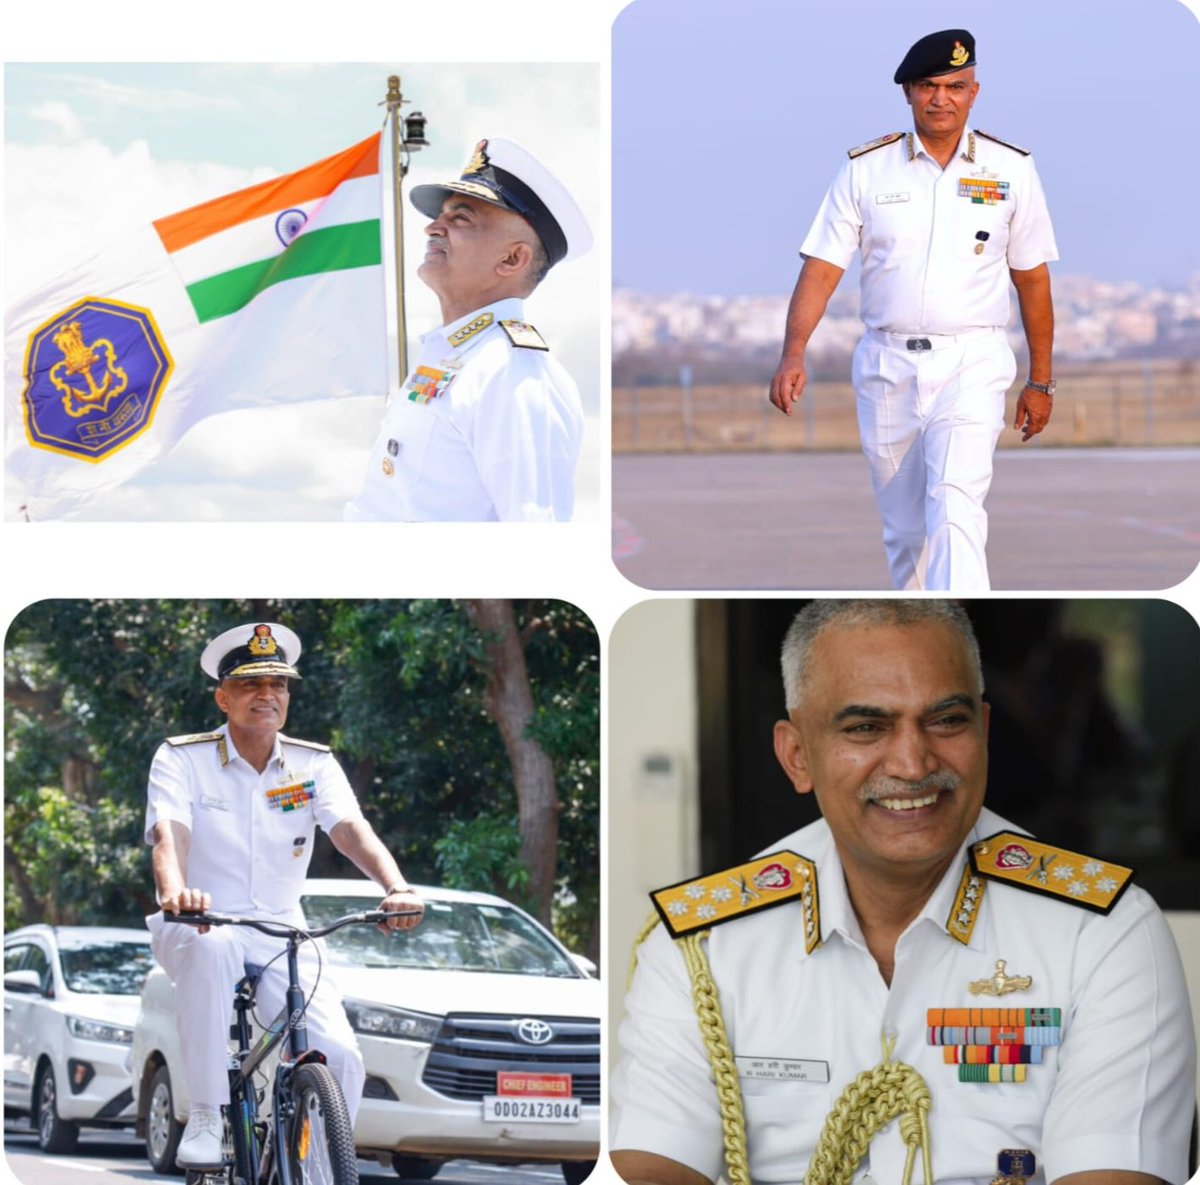 Fair winds, Admiral R Hari Kumar! #IndianNavy and #Nation is grateful for 41 years of your unwavering dedicated service! Your vision as the #CNS inspired countless #SHIPMATES and your leadership has left an indelible mark in their hearts! #FarewellAdmiral